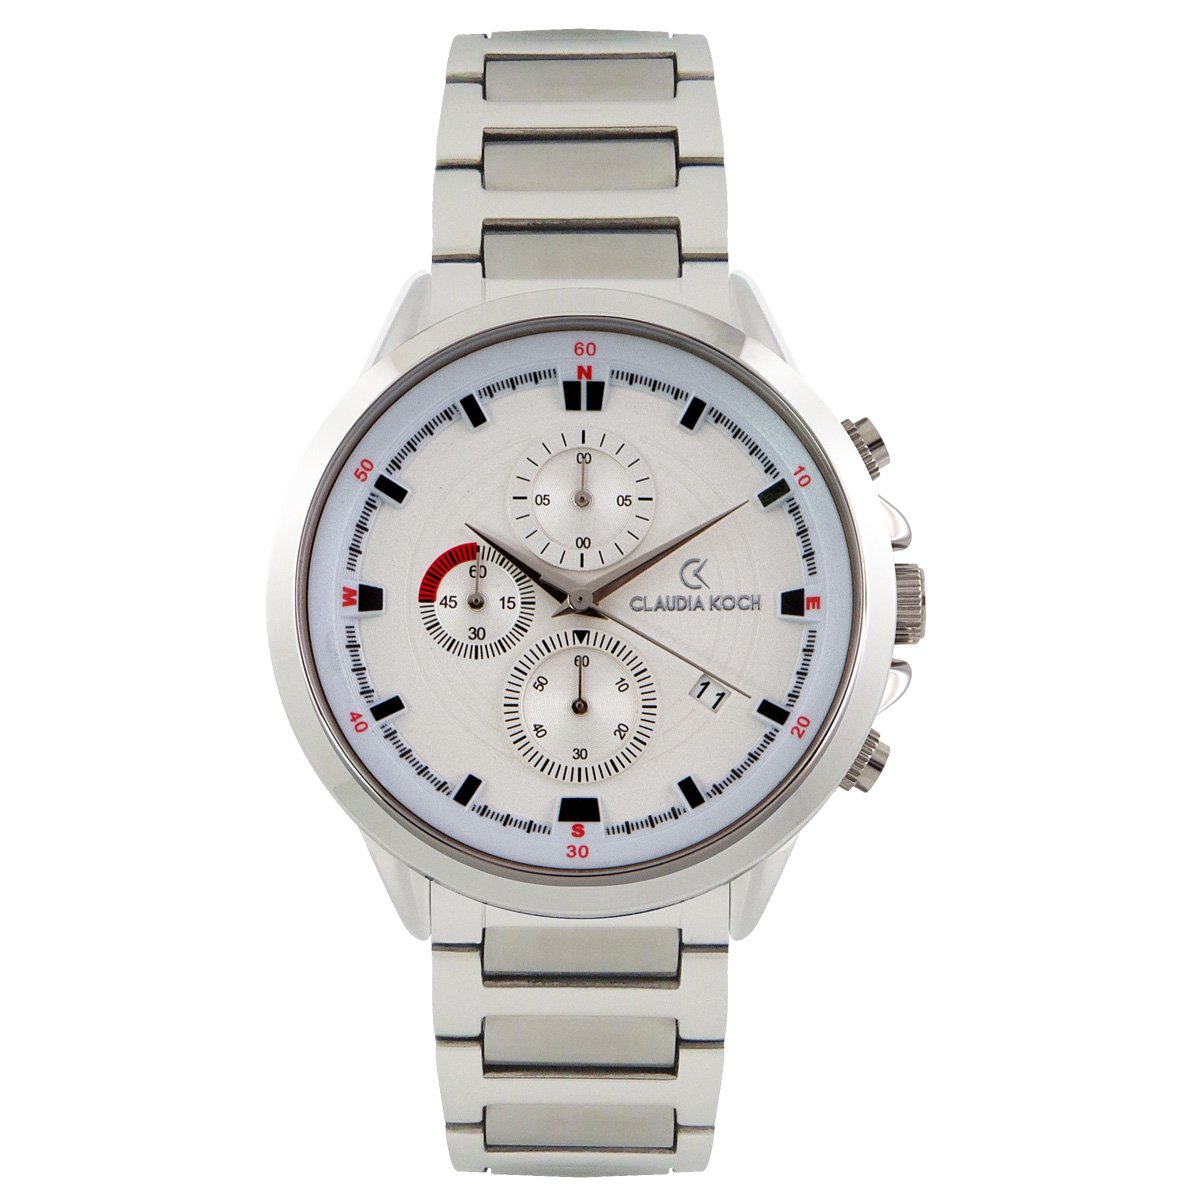 ClaudiaKoch CK 4315 Silver Analog Chronograph Stainless Steel